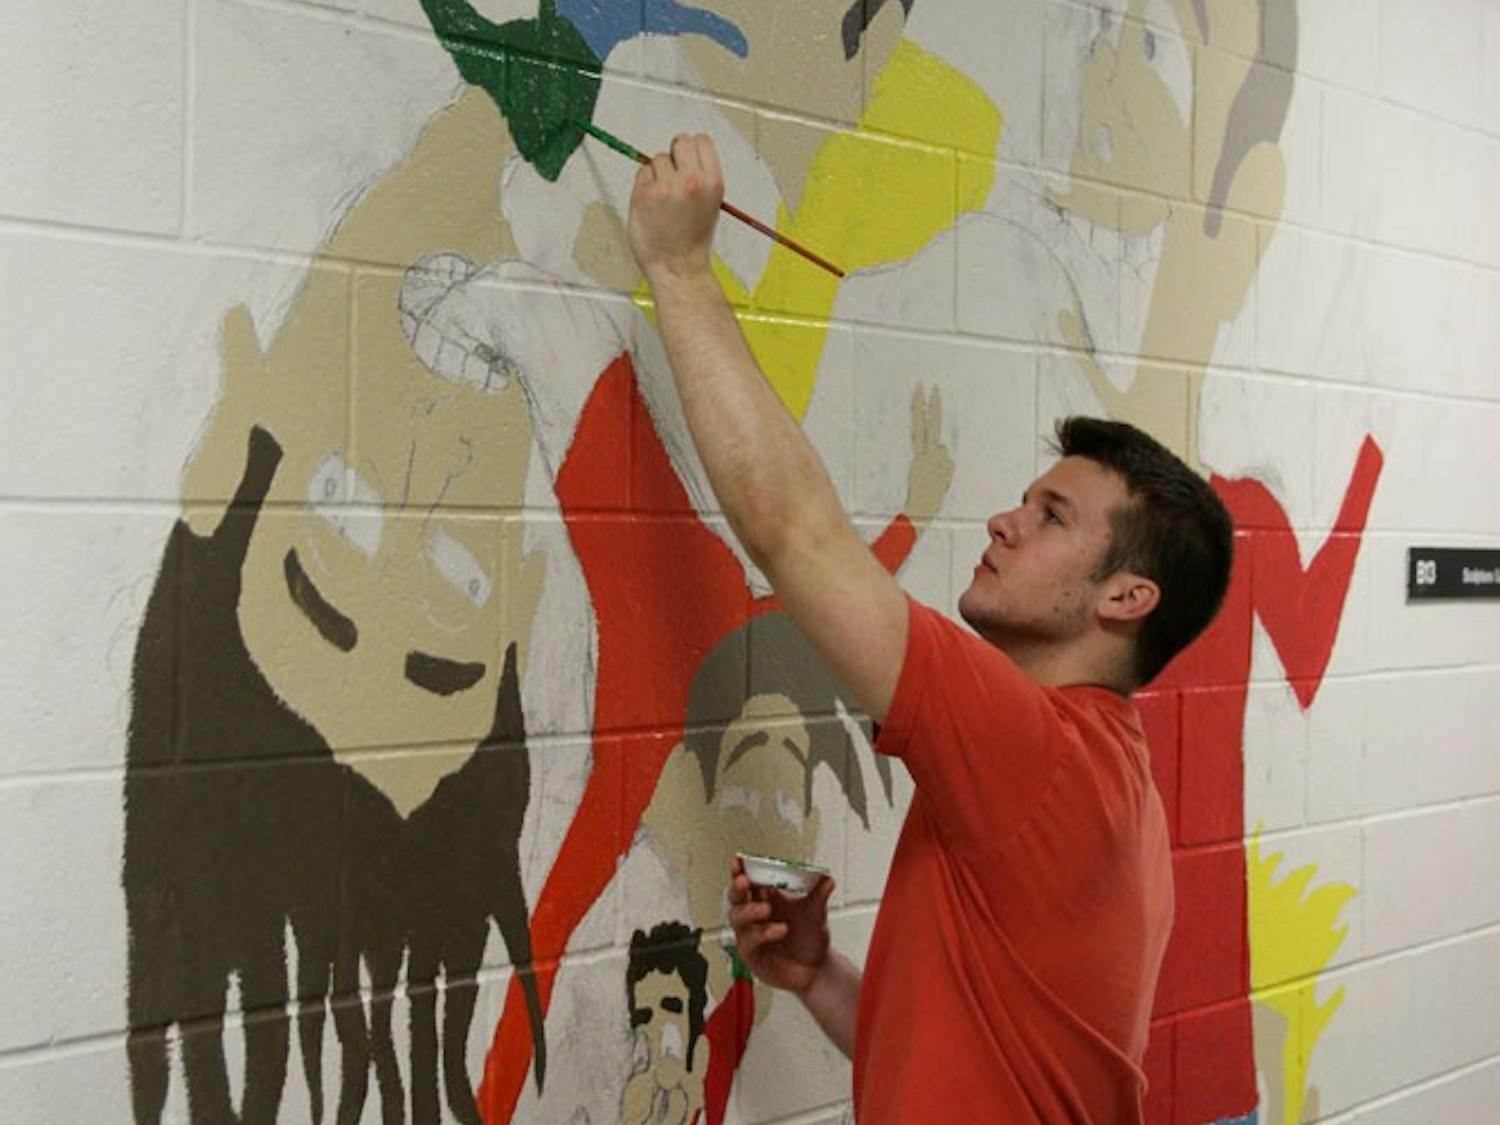 Michael Perlman, a sophomore fine arts and communication major, said students will often stop and give him support with his work, drawn to the intricate and spiraling designs - he said he wanted his mural to be “as crazy as possible."